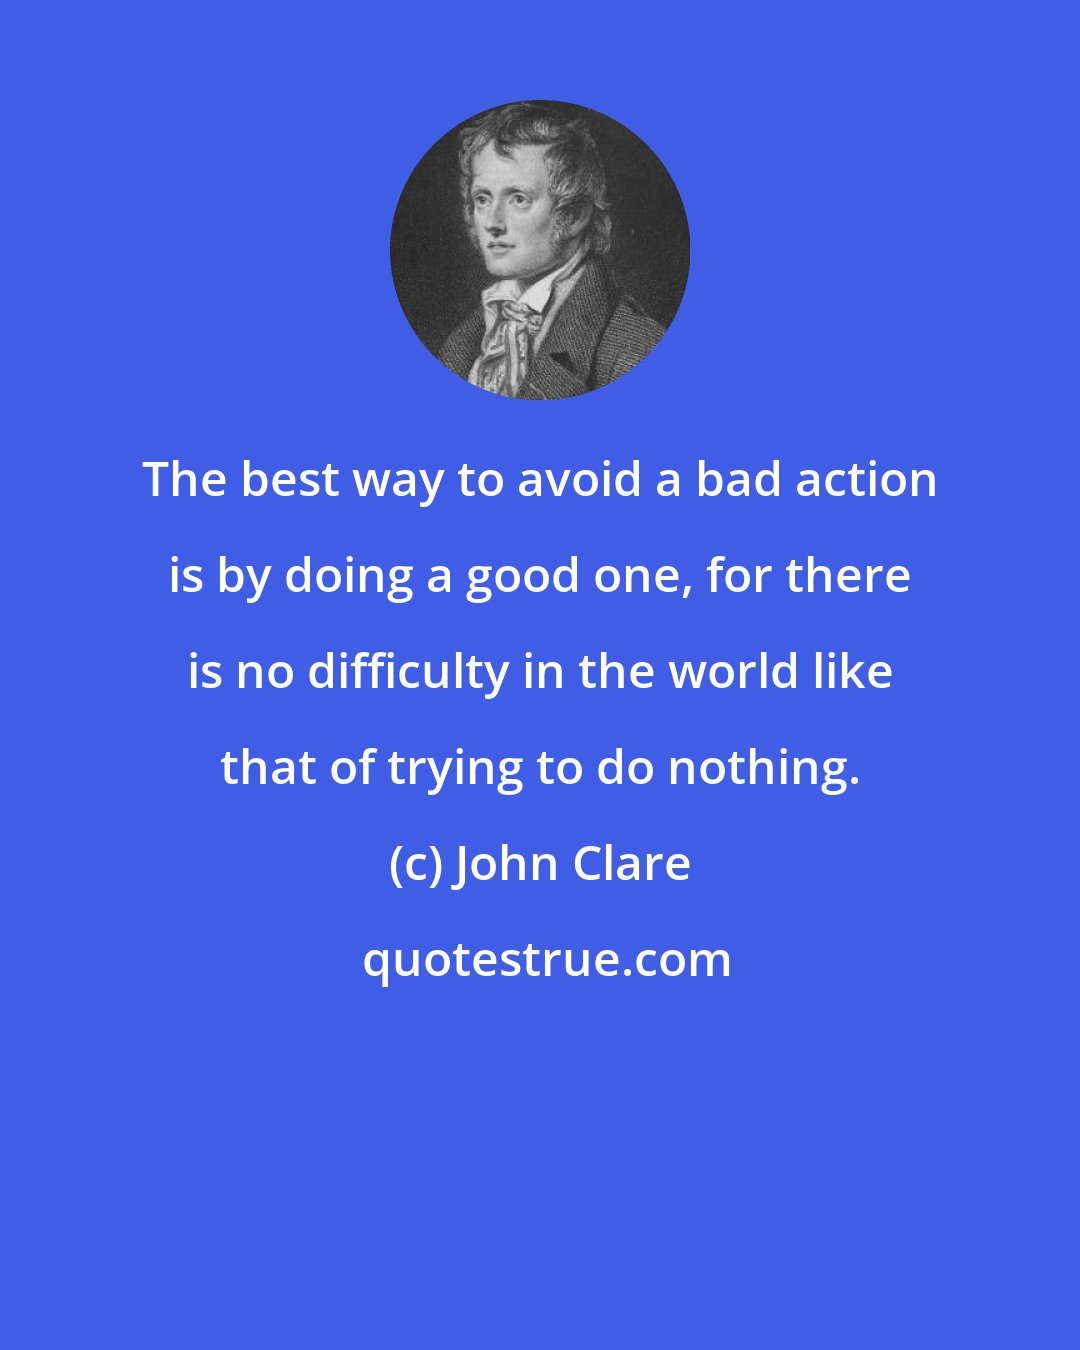 John Clare: The best way to avoid a bad action is by doing a good one, for there is no difficulty in the world like that of trying to do nothing.